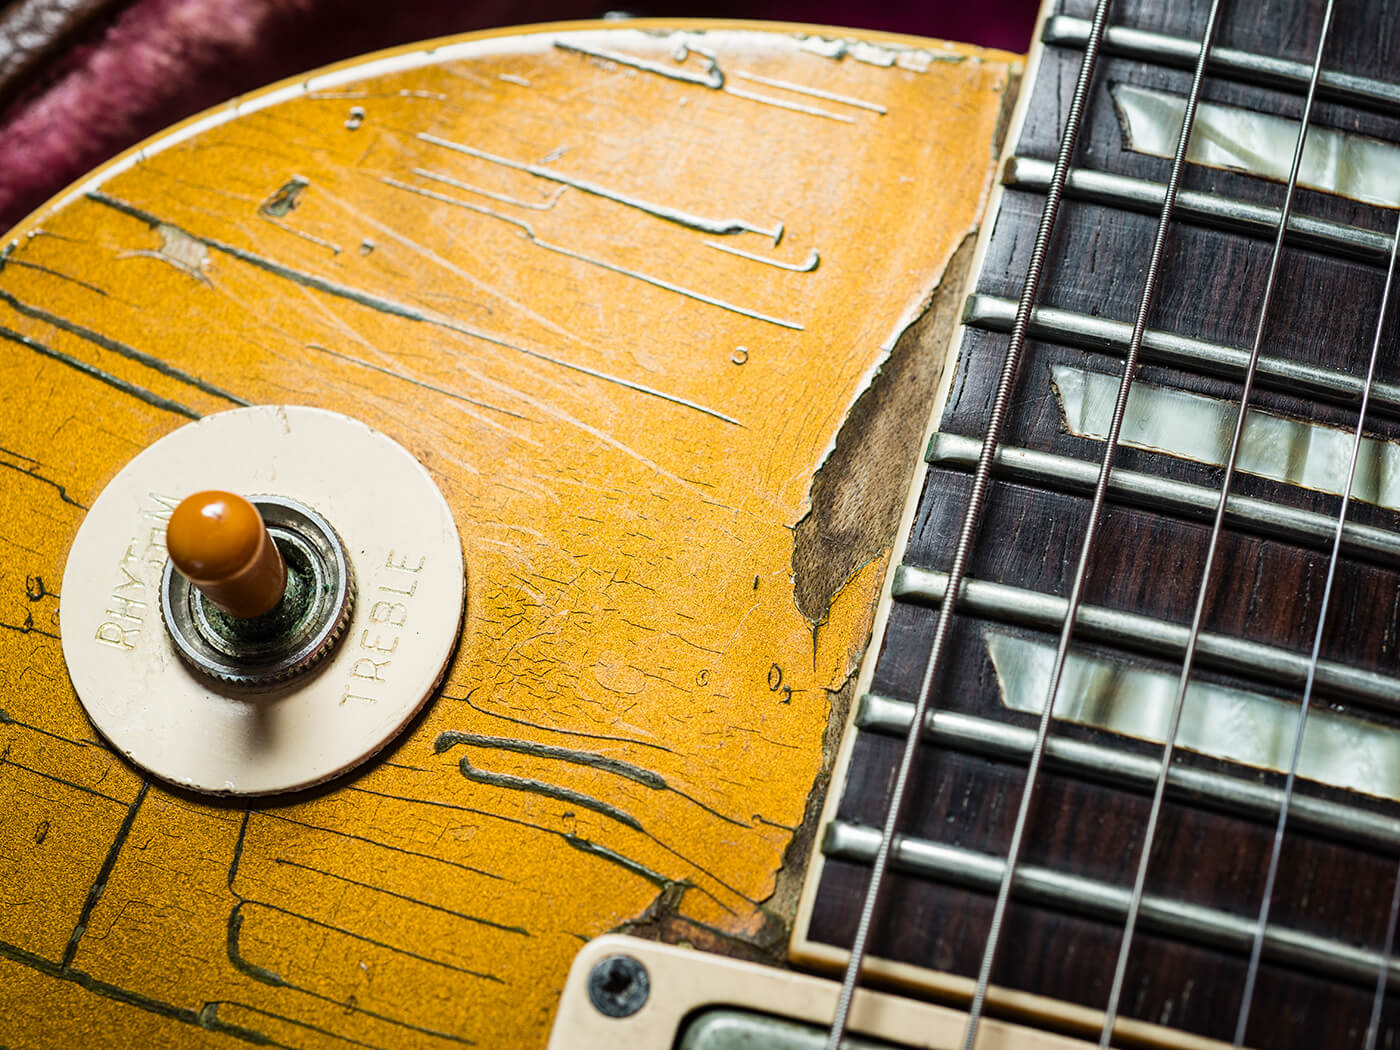 Brian Ray's 1957 Les Paul Goldtop Switch